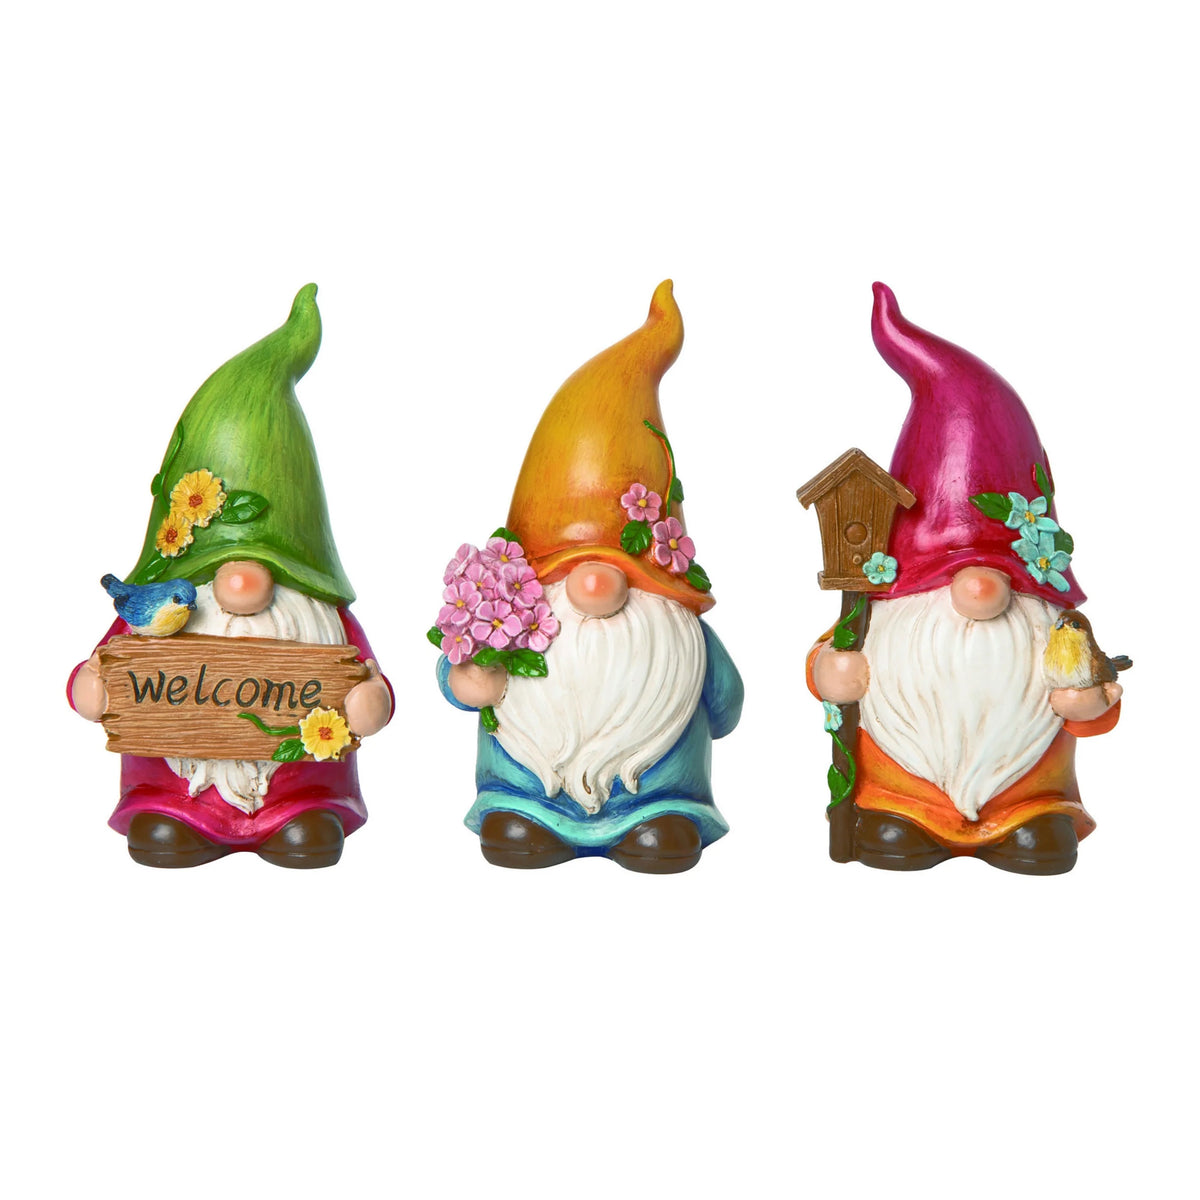   Ceramic Gnomes Statue for Lawn -Every Girl Loves Sparkles